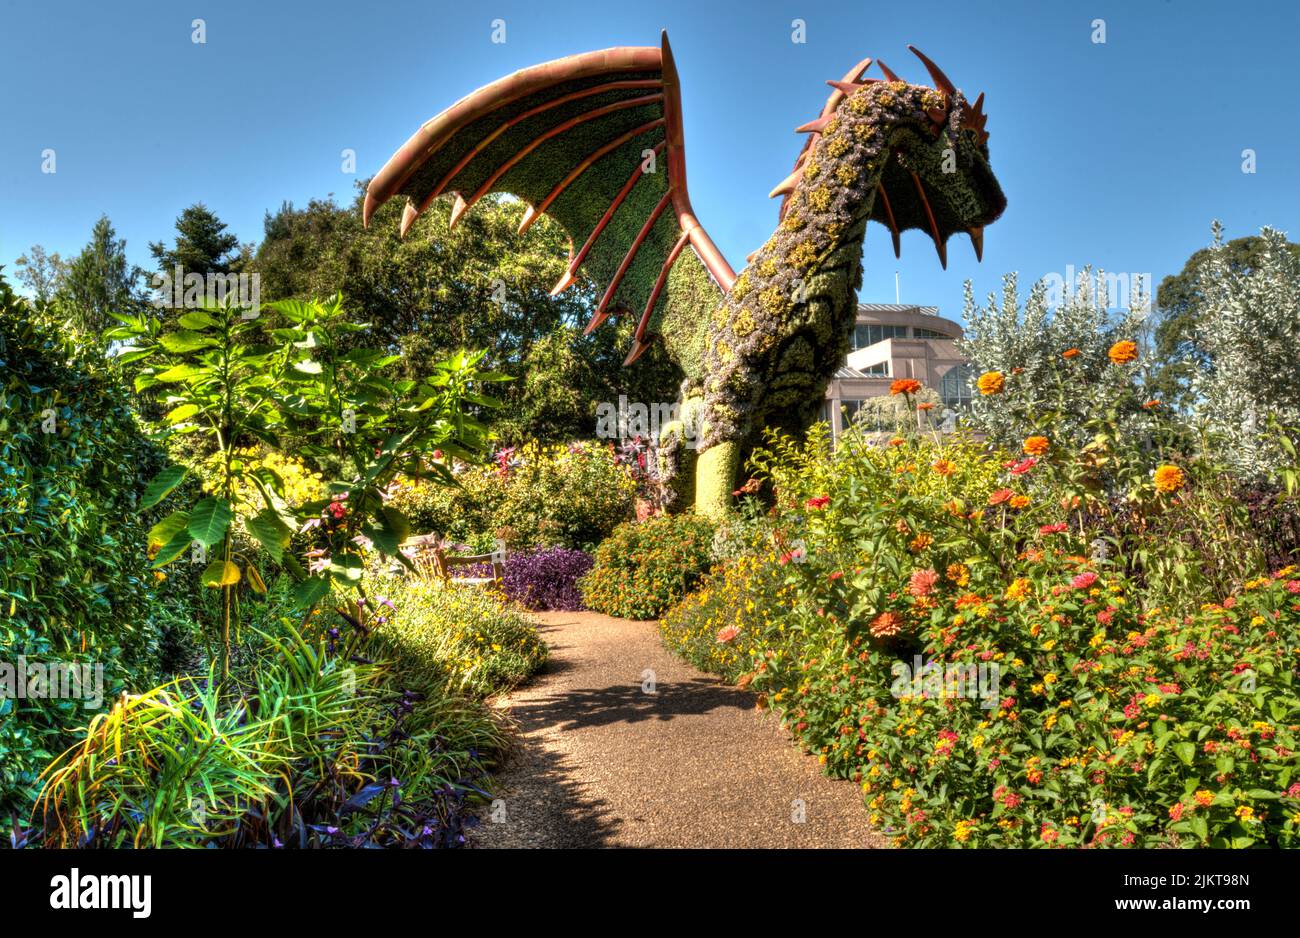 The Dragon flower sculpture at the Atlanta Botanical Gardens in the USA Stock Photo